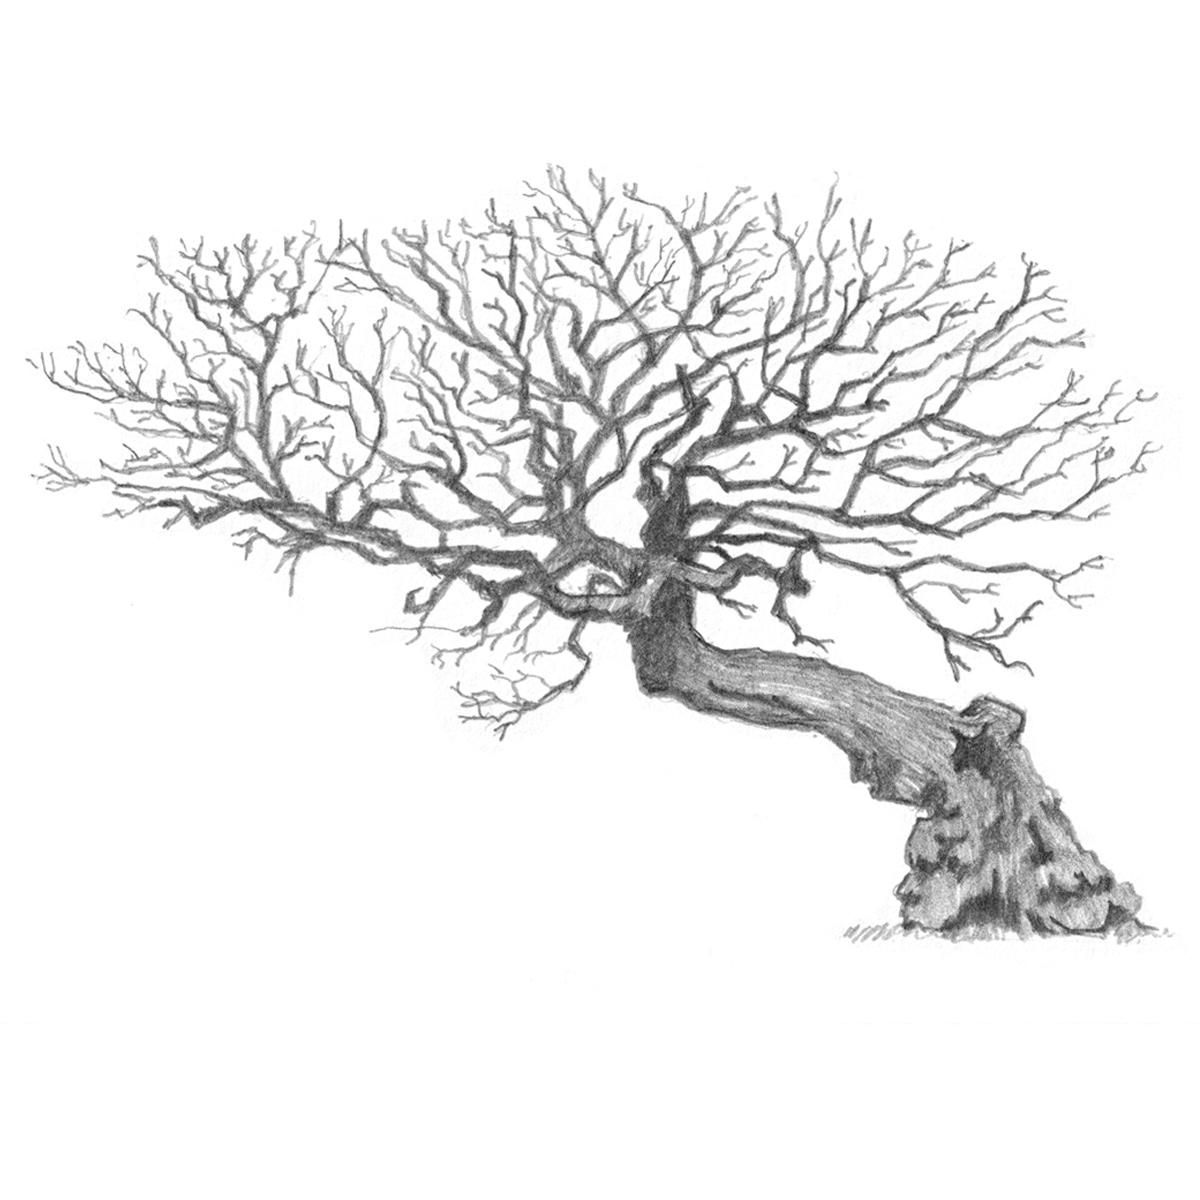 Limited edition print from pencil drawing of an old tree